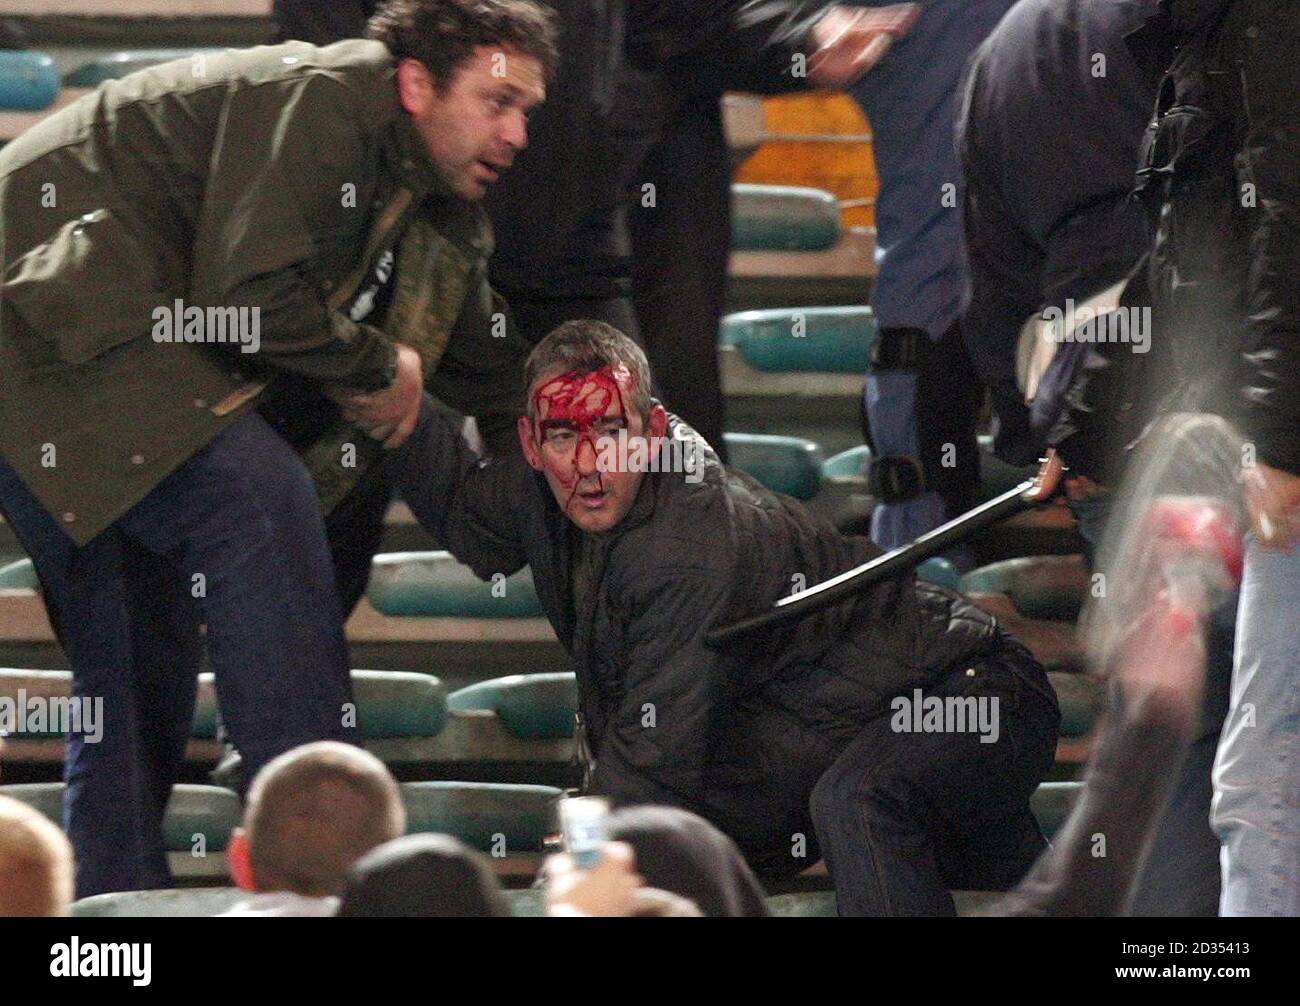 A Manchester United fan covered in blood after fighting broke out on the stands during the UEFA Champions League Quarter-final first leg match against Roma at the Olympic Stadium, Rome, Italy. Stock Photo